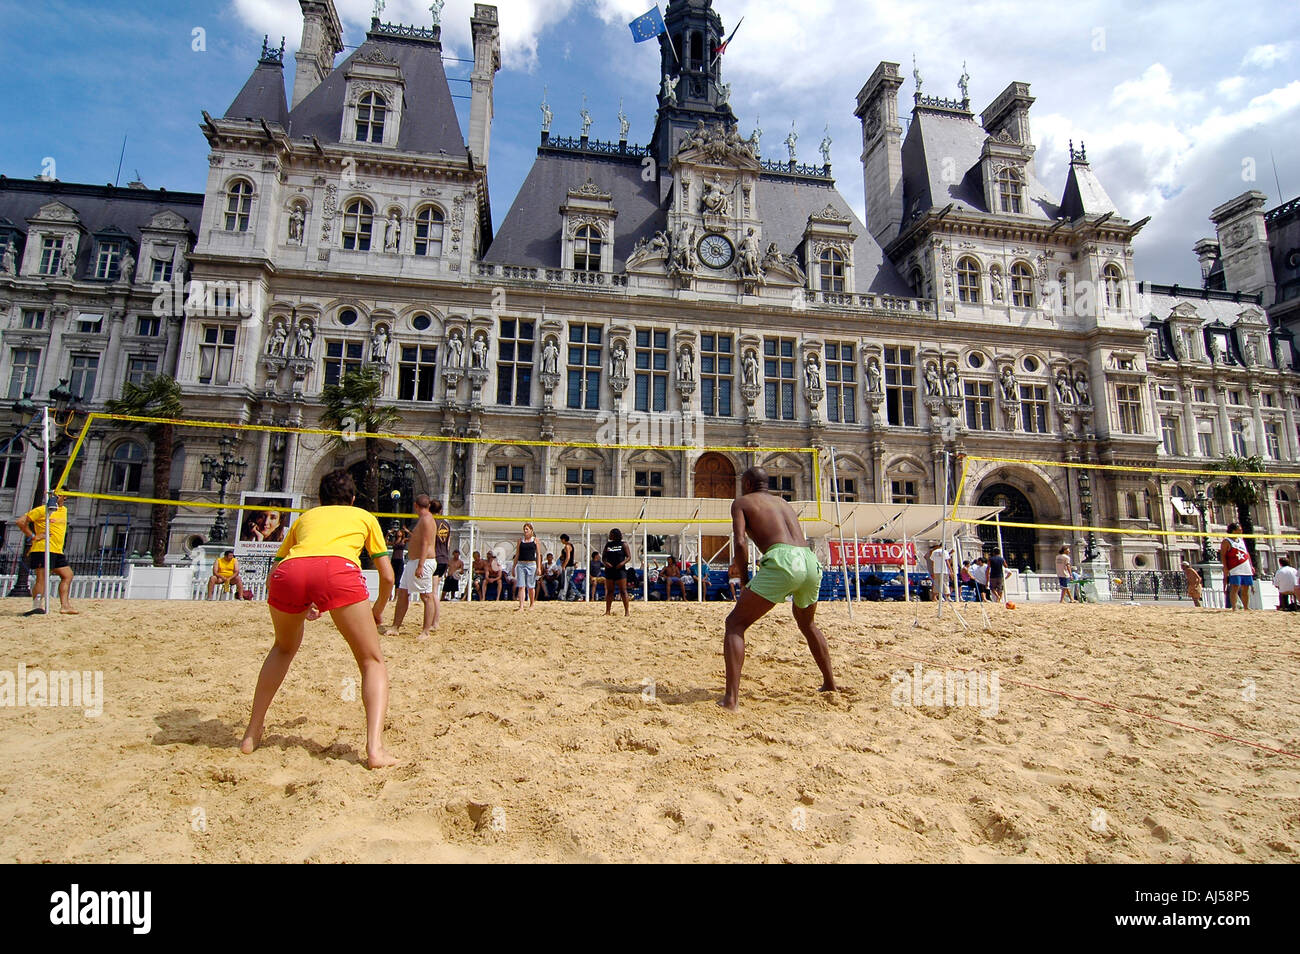 People playing beach volleyball on an artificial field set up in front of City Hall during the Paris Plage event, Paris, France. Stock Photo